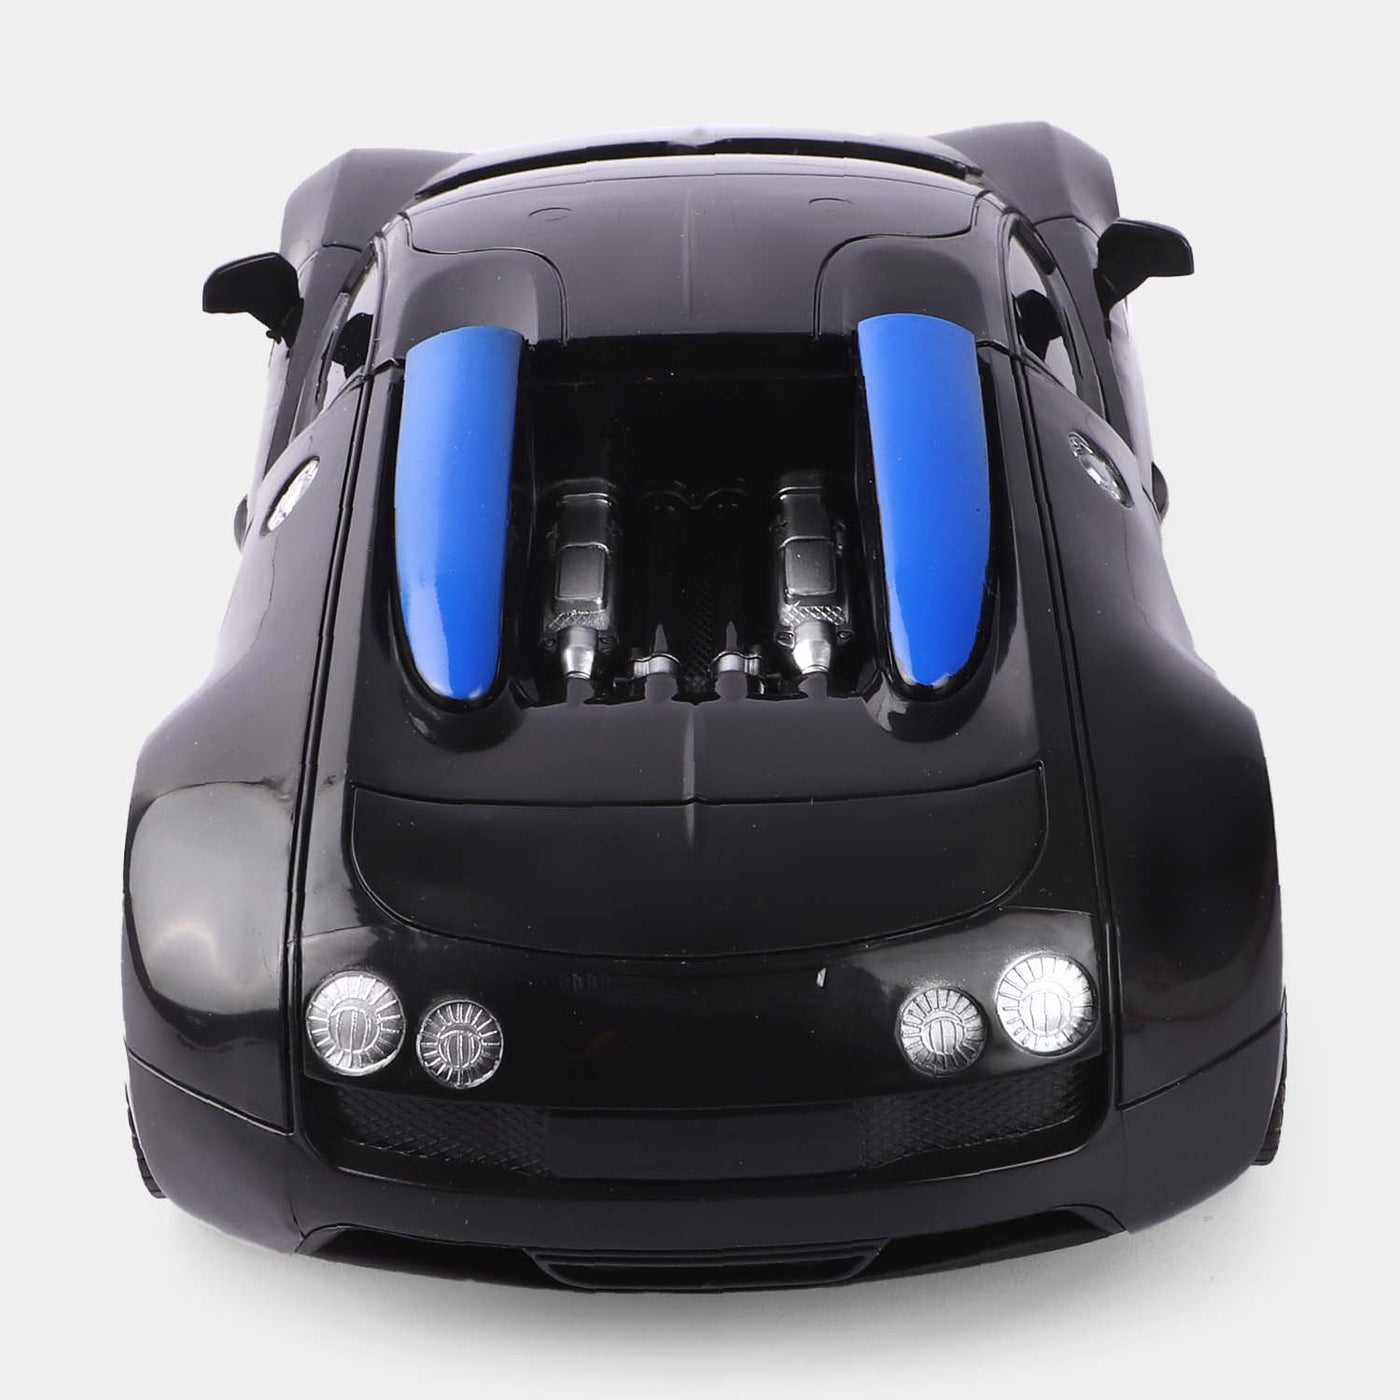 Remote Control Model Sports Car For Kids